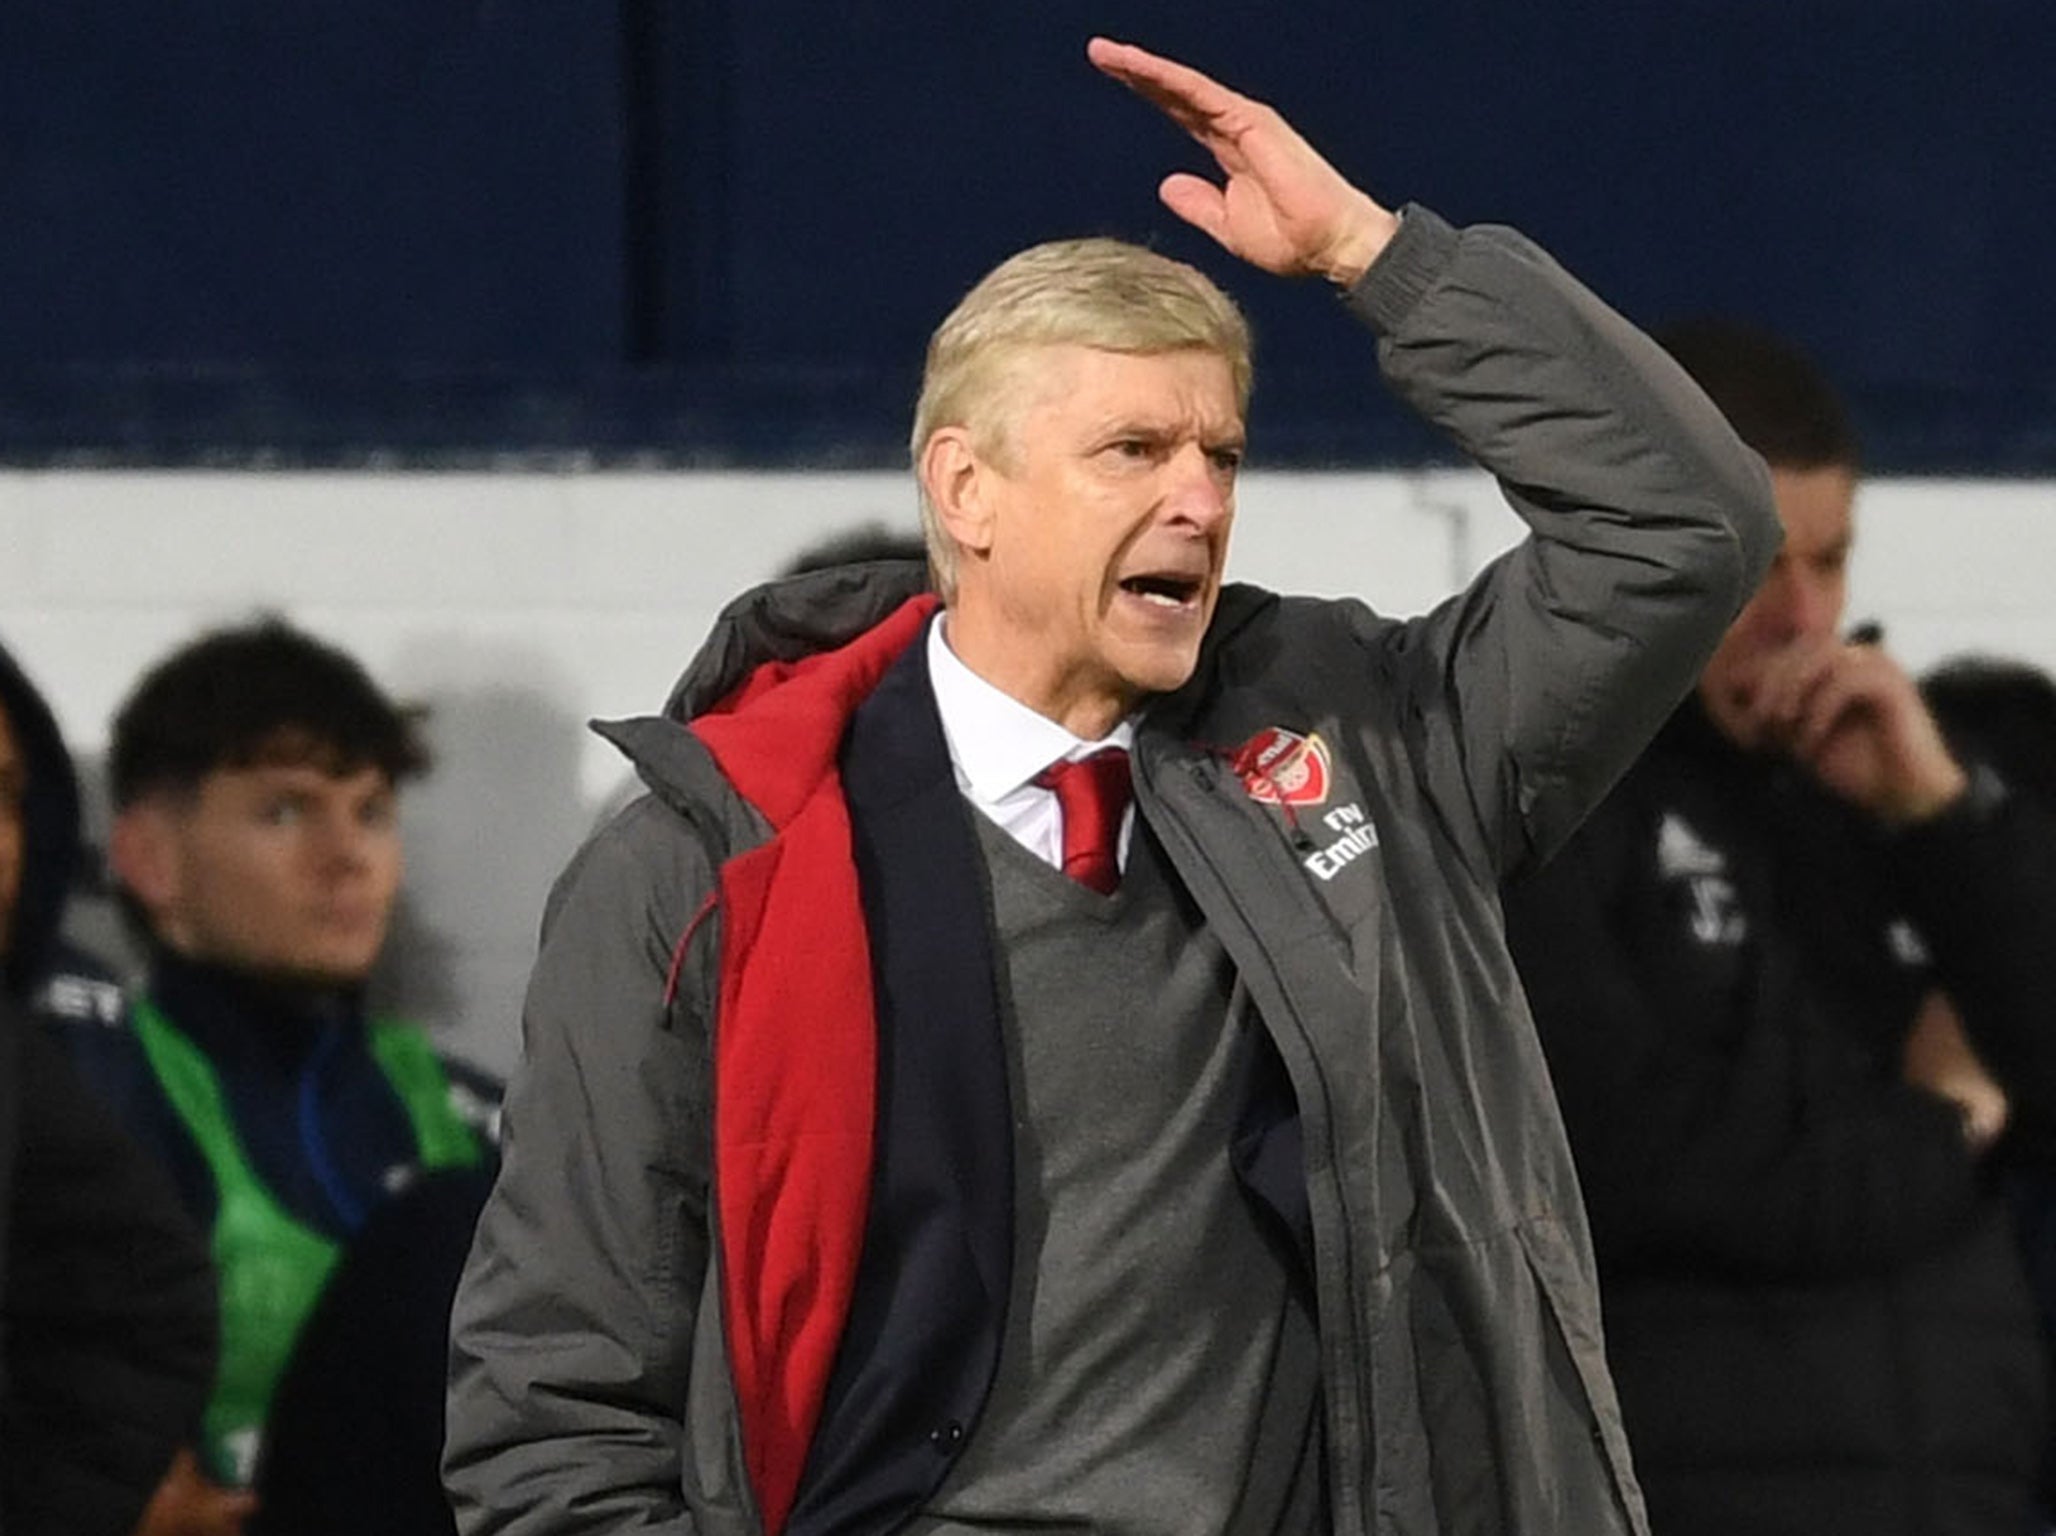 Wenger is facing potential FA charges for recent comments